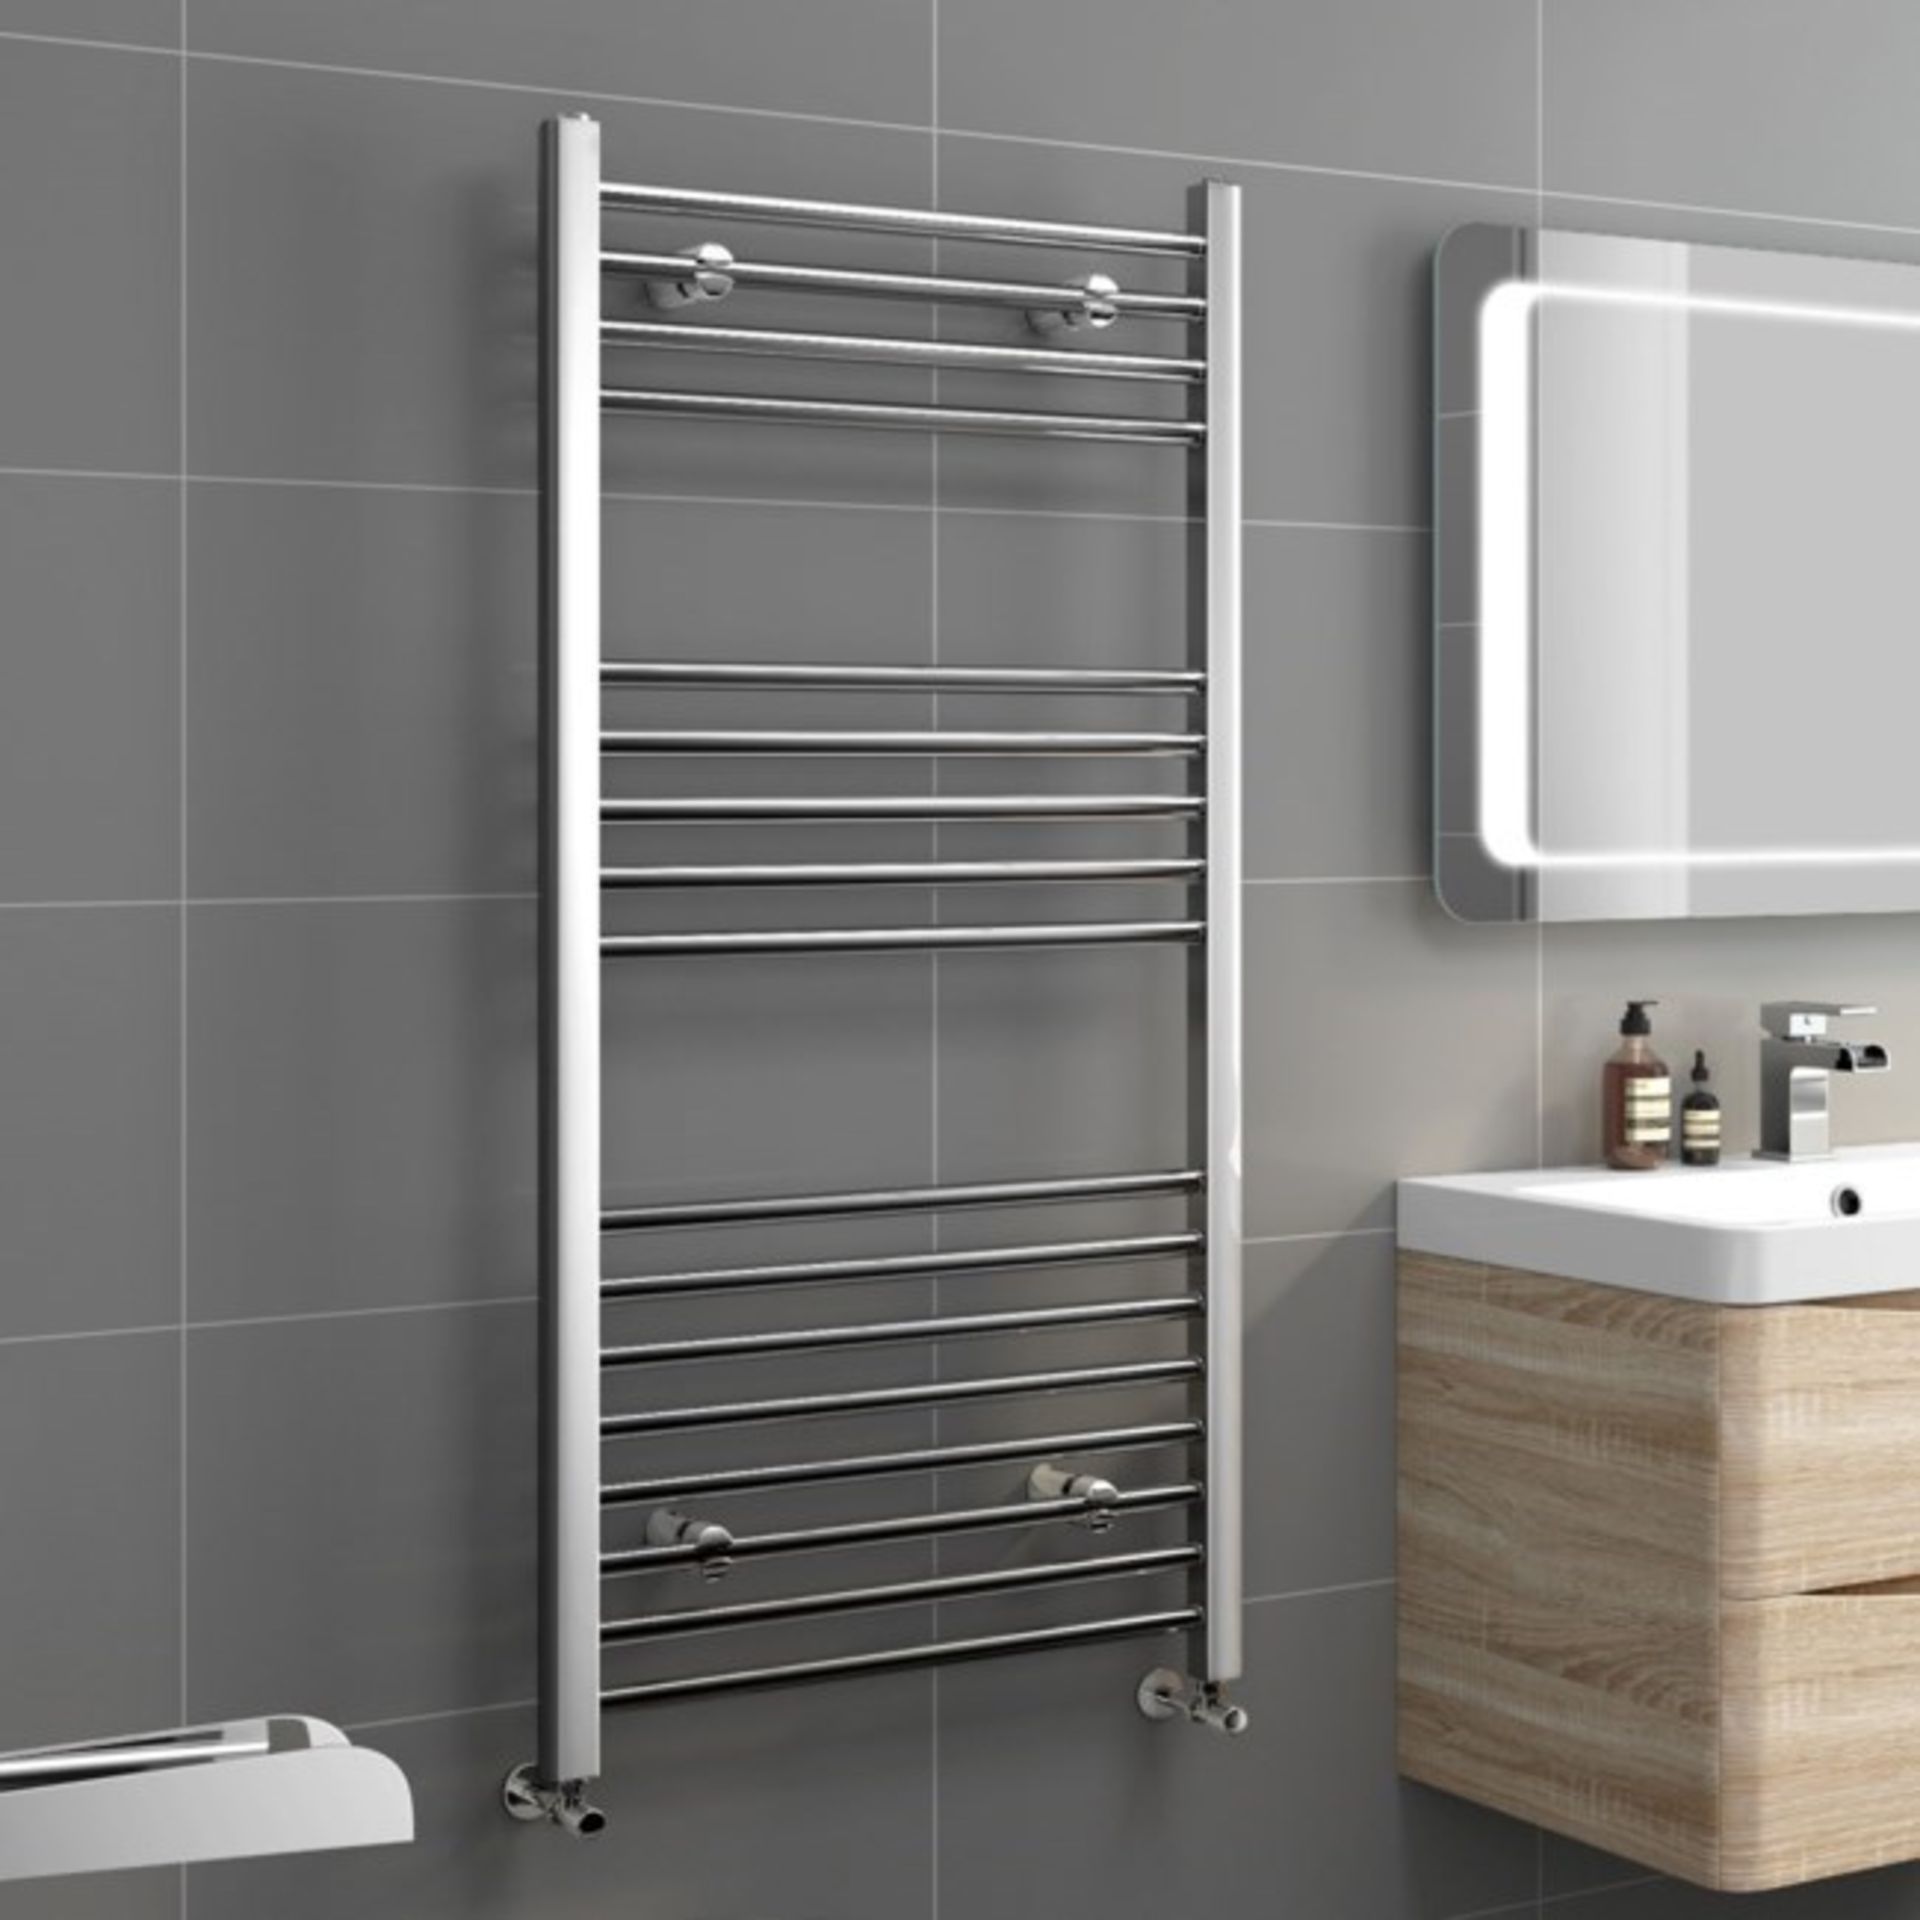 NEW & BOXED 1200x600mm - 20mm Tubes - Chrome Heated Straight Rail Ladder Towel Radiator.RRP £2... - Image 2 of 2